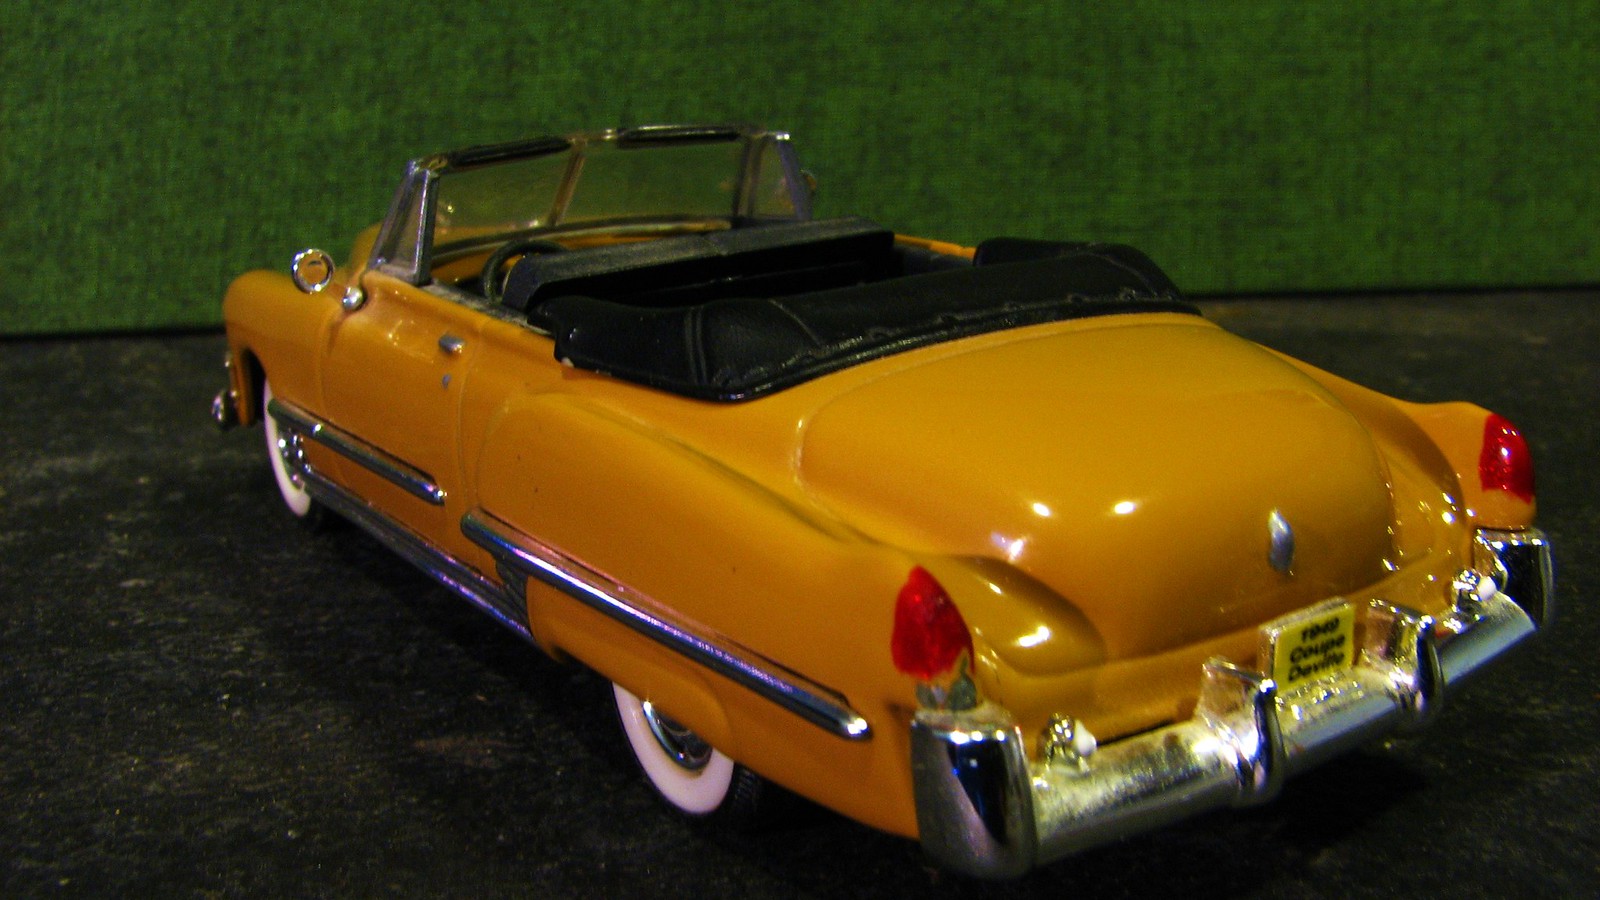 A 1/43 SCALE 1949 CADILLAC COUPE DEVILLE | This is a Yatming… | Flickr